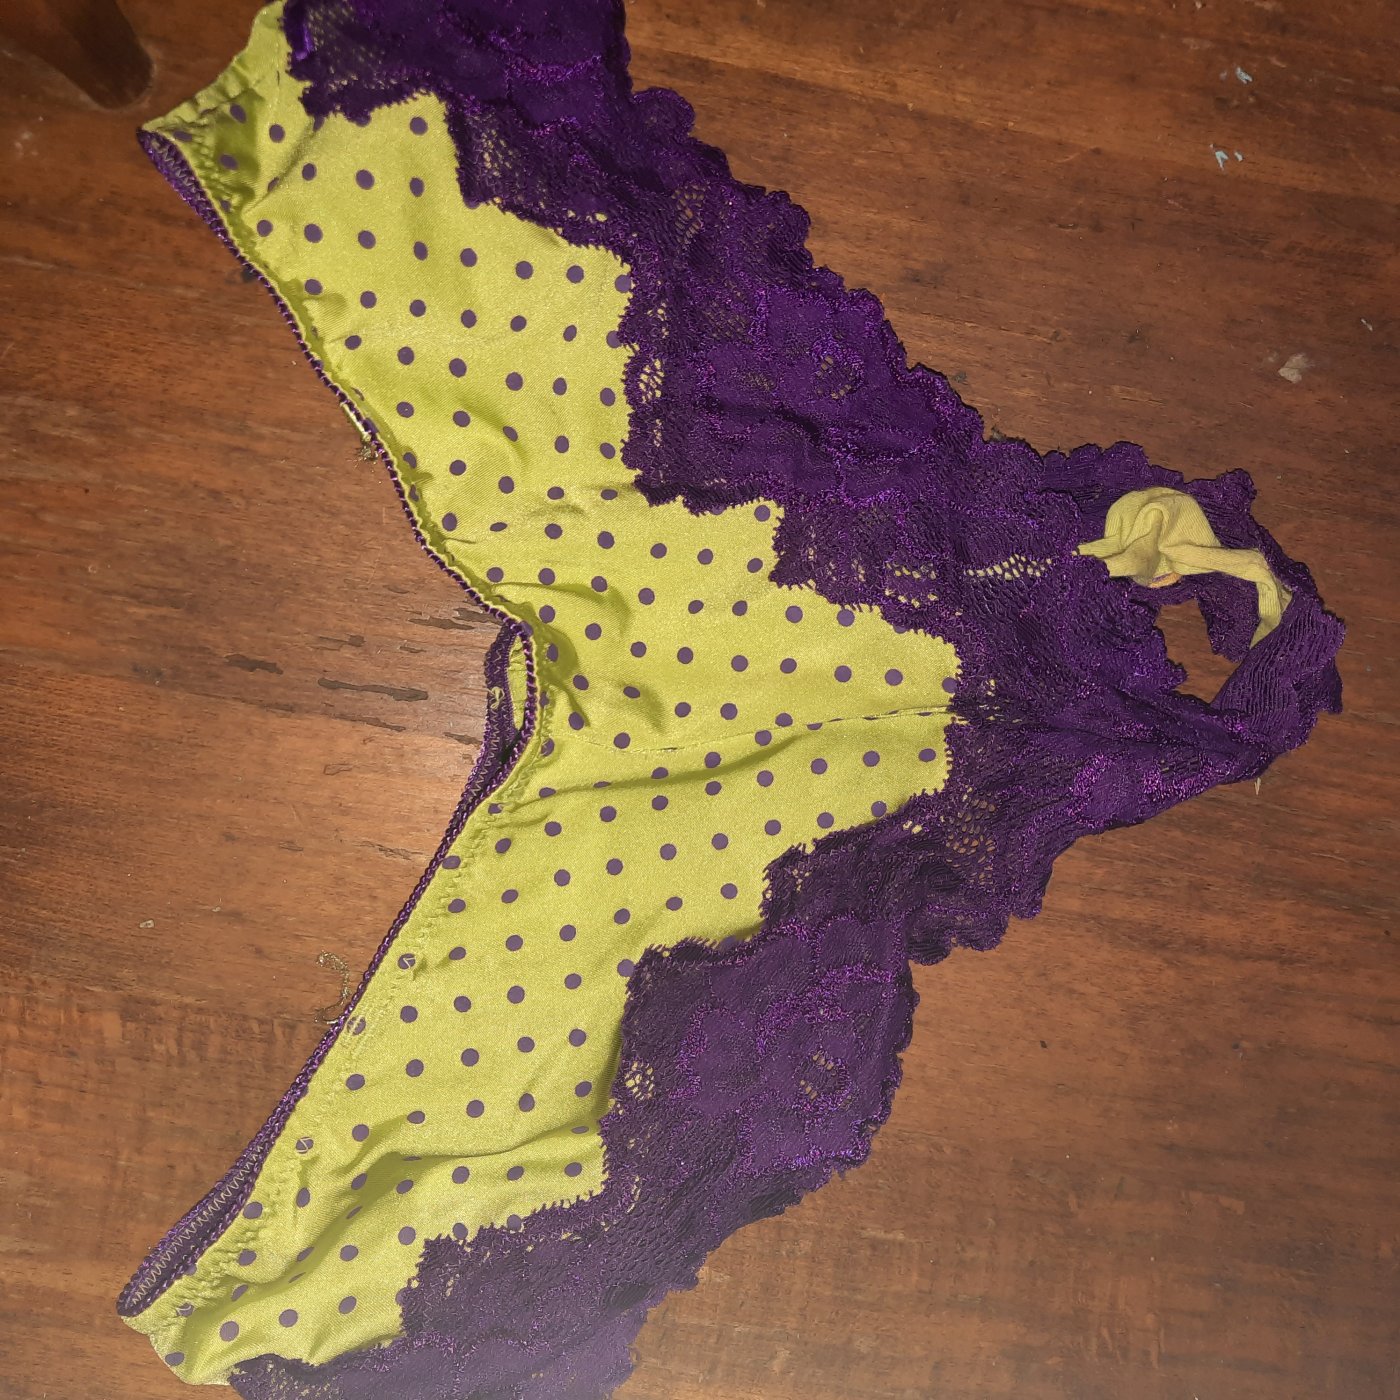 Used panties and extras